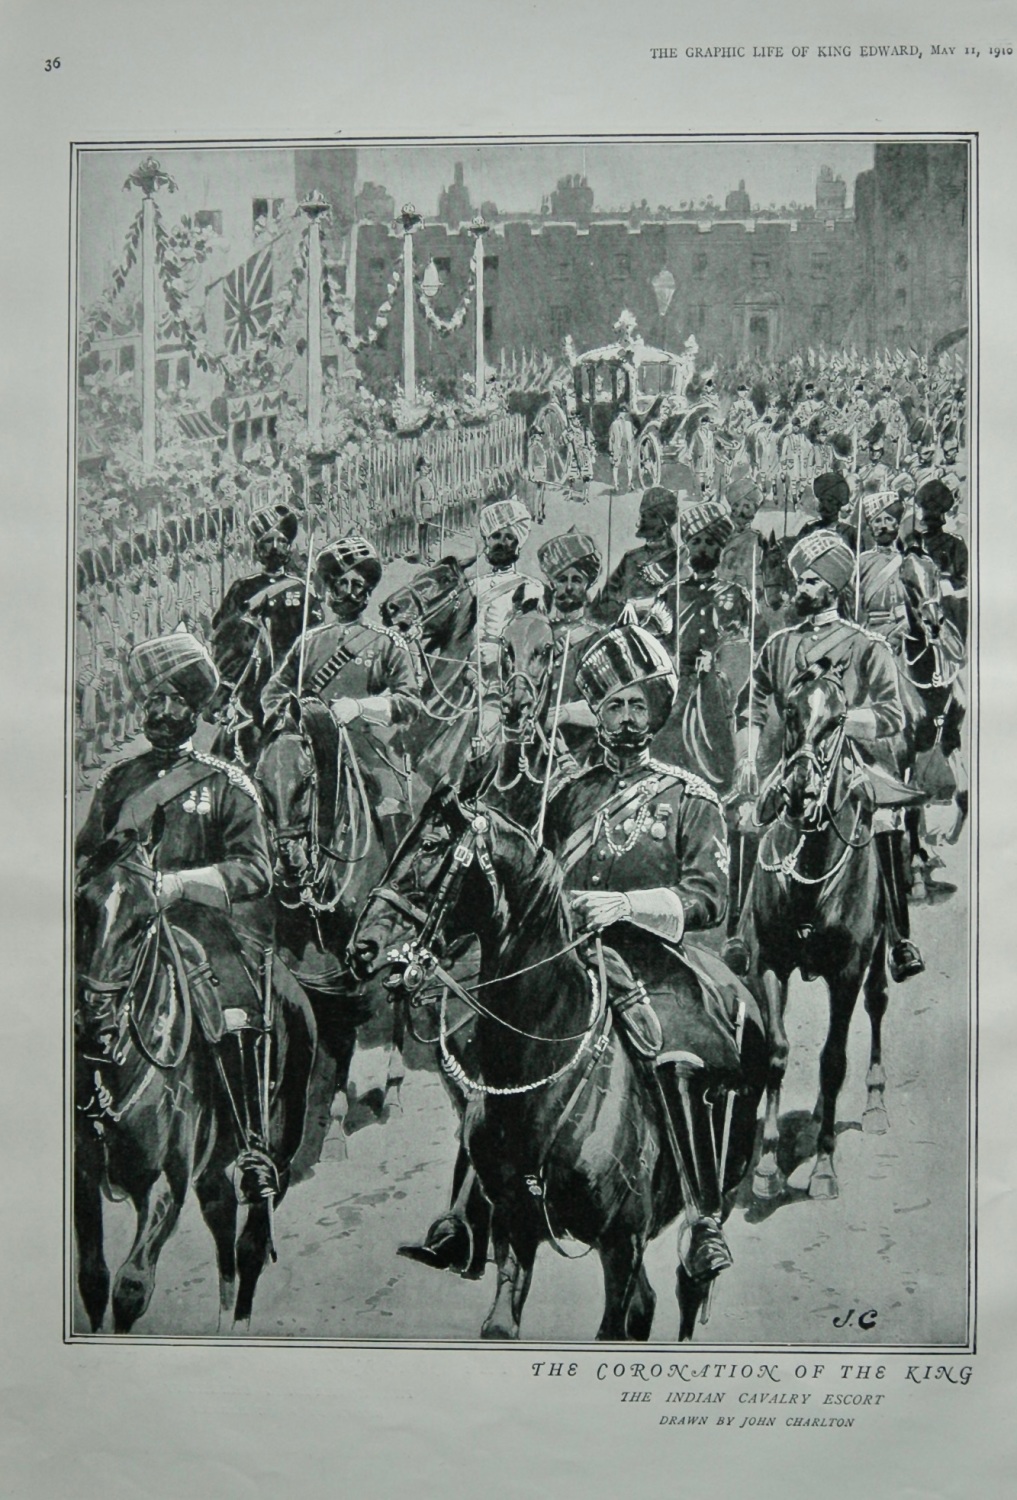 Coronation of the King : The Indian Cavalry Escort.  (Edward VII).